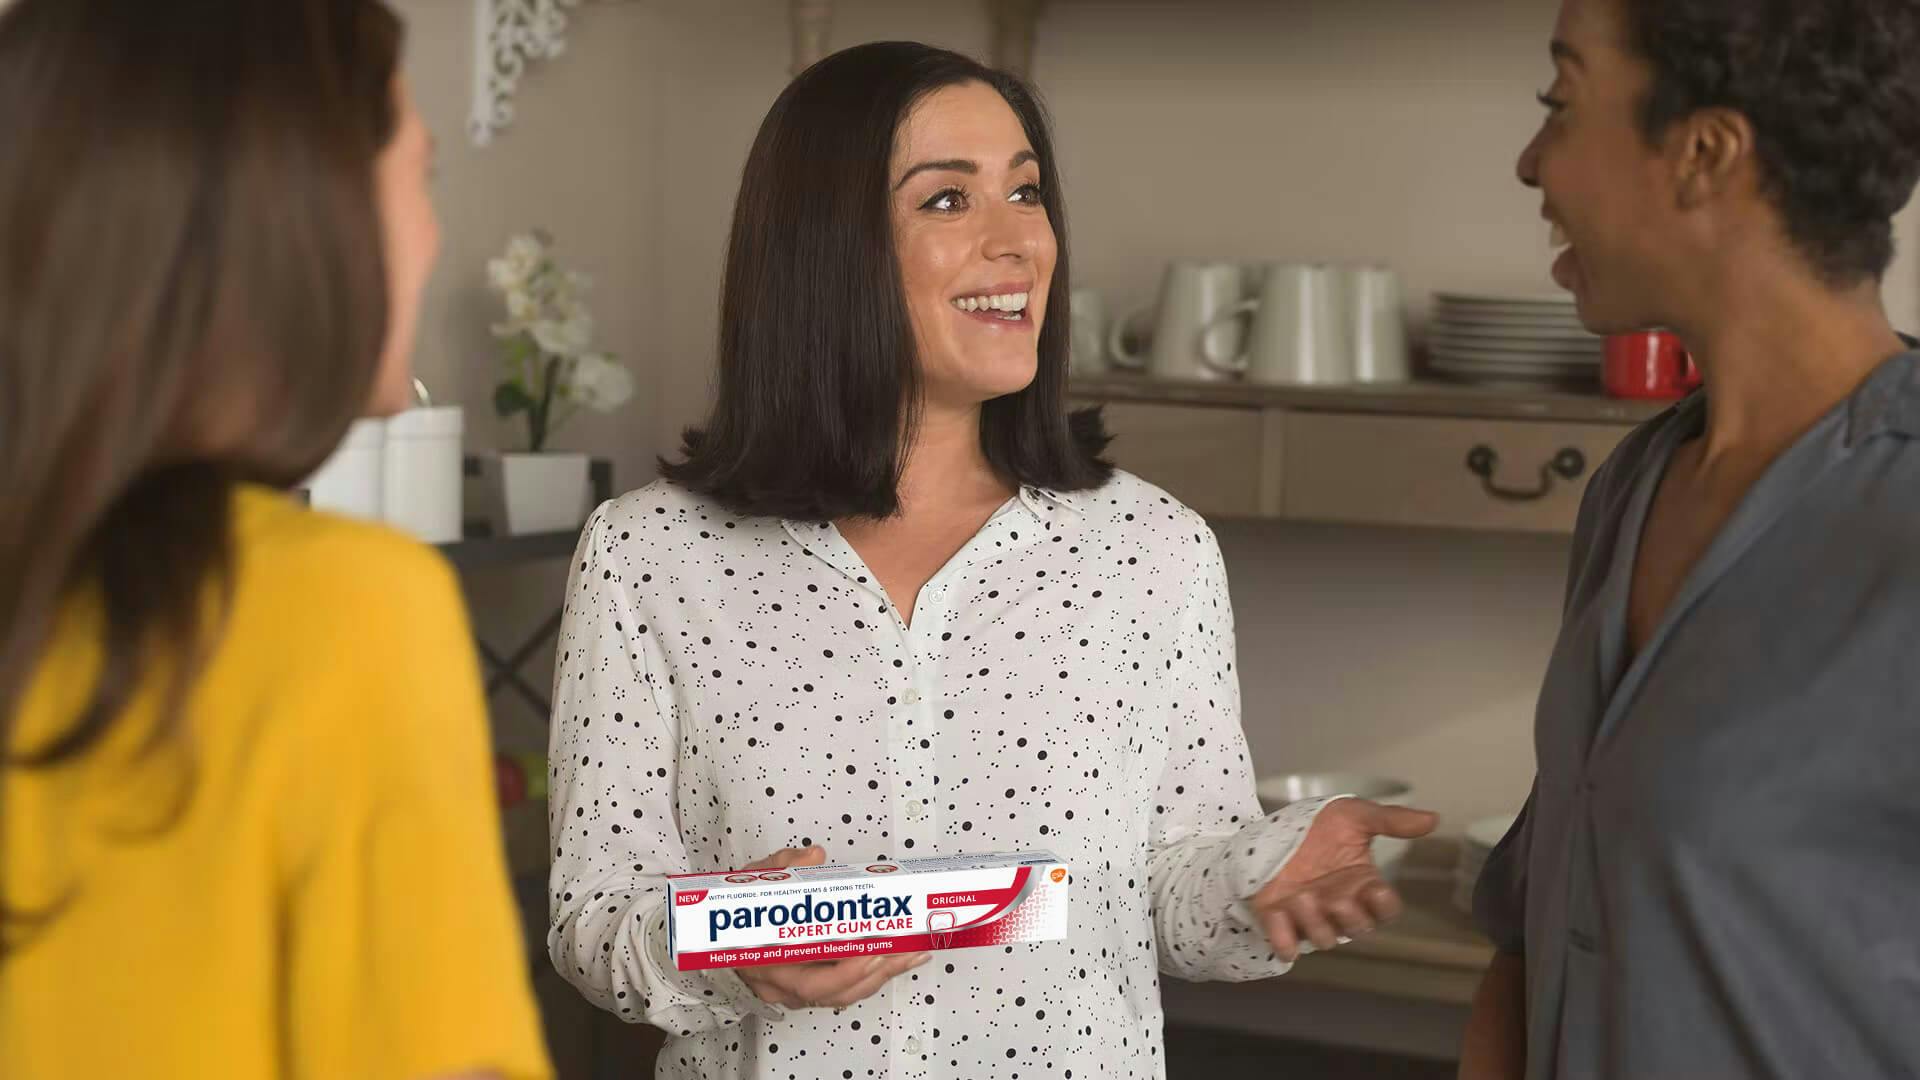 A woman smiling and talking to others while holding toothpaste